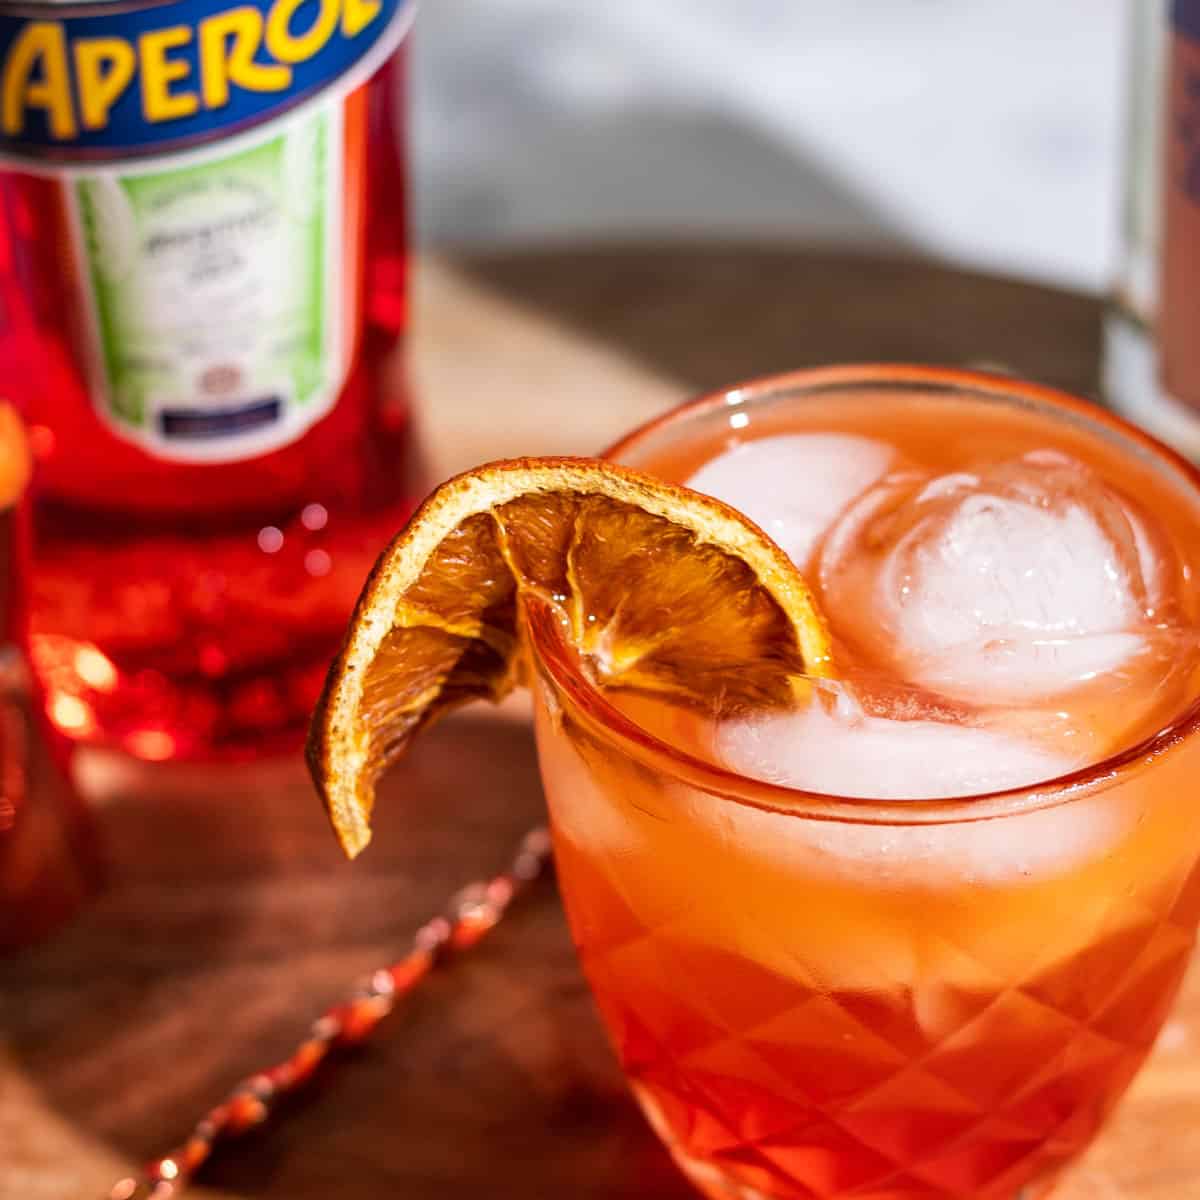 Glass of aperol tonic on a wood surface with a cocktail spoon and a bottle of aperol on the side.